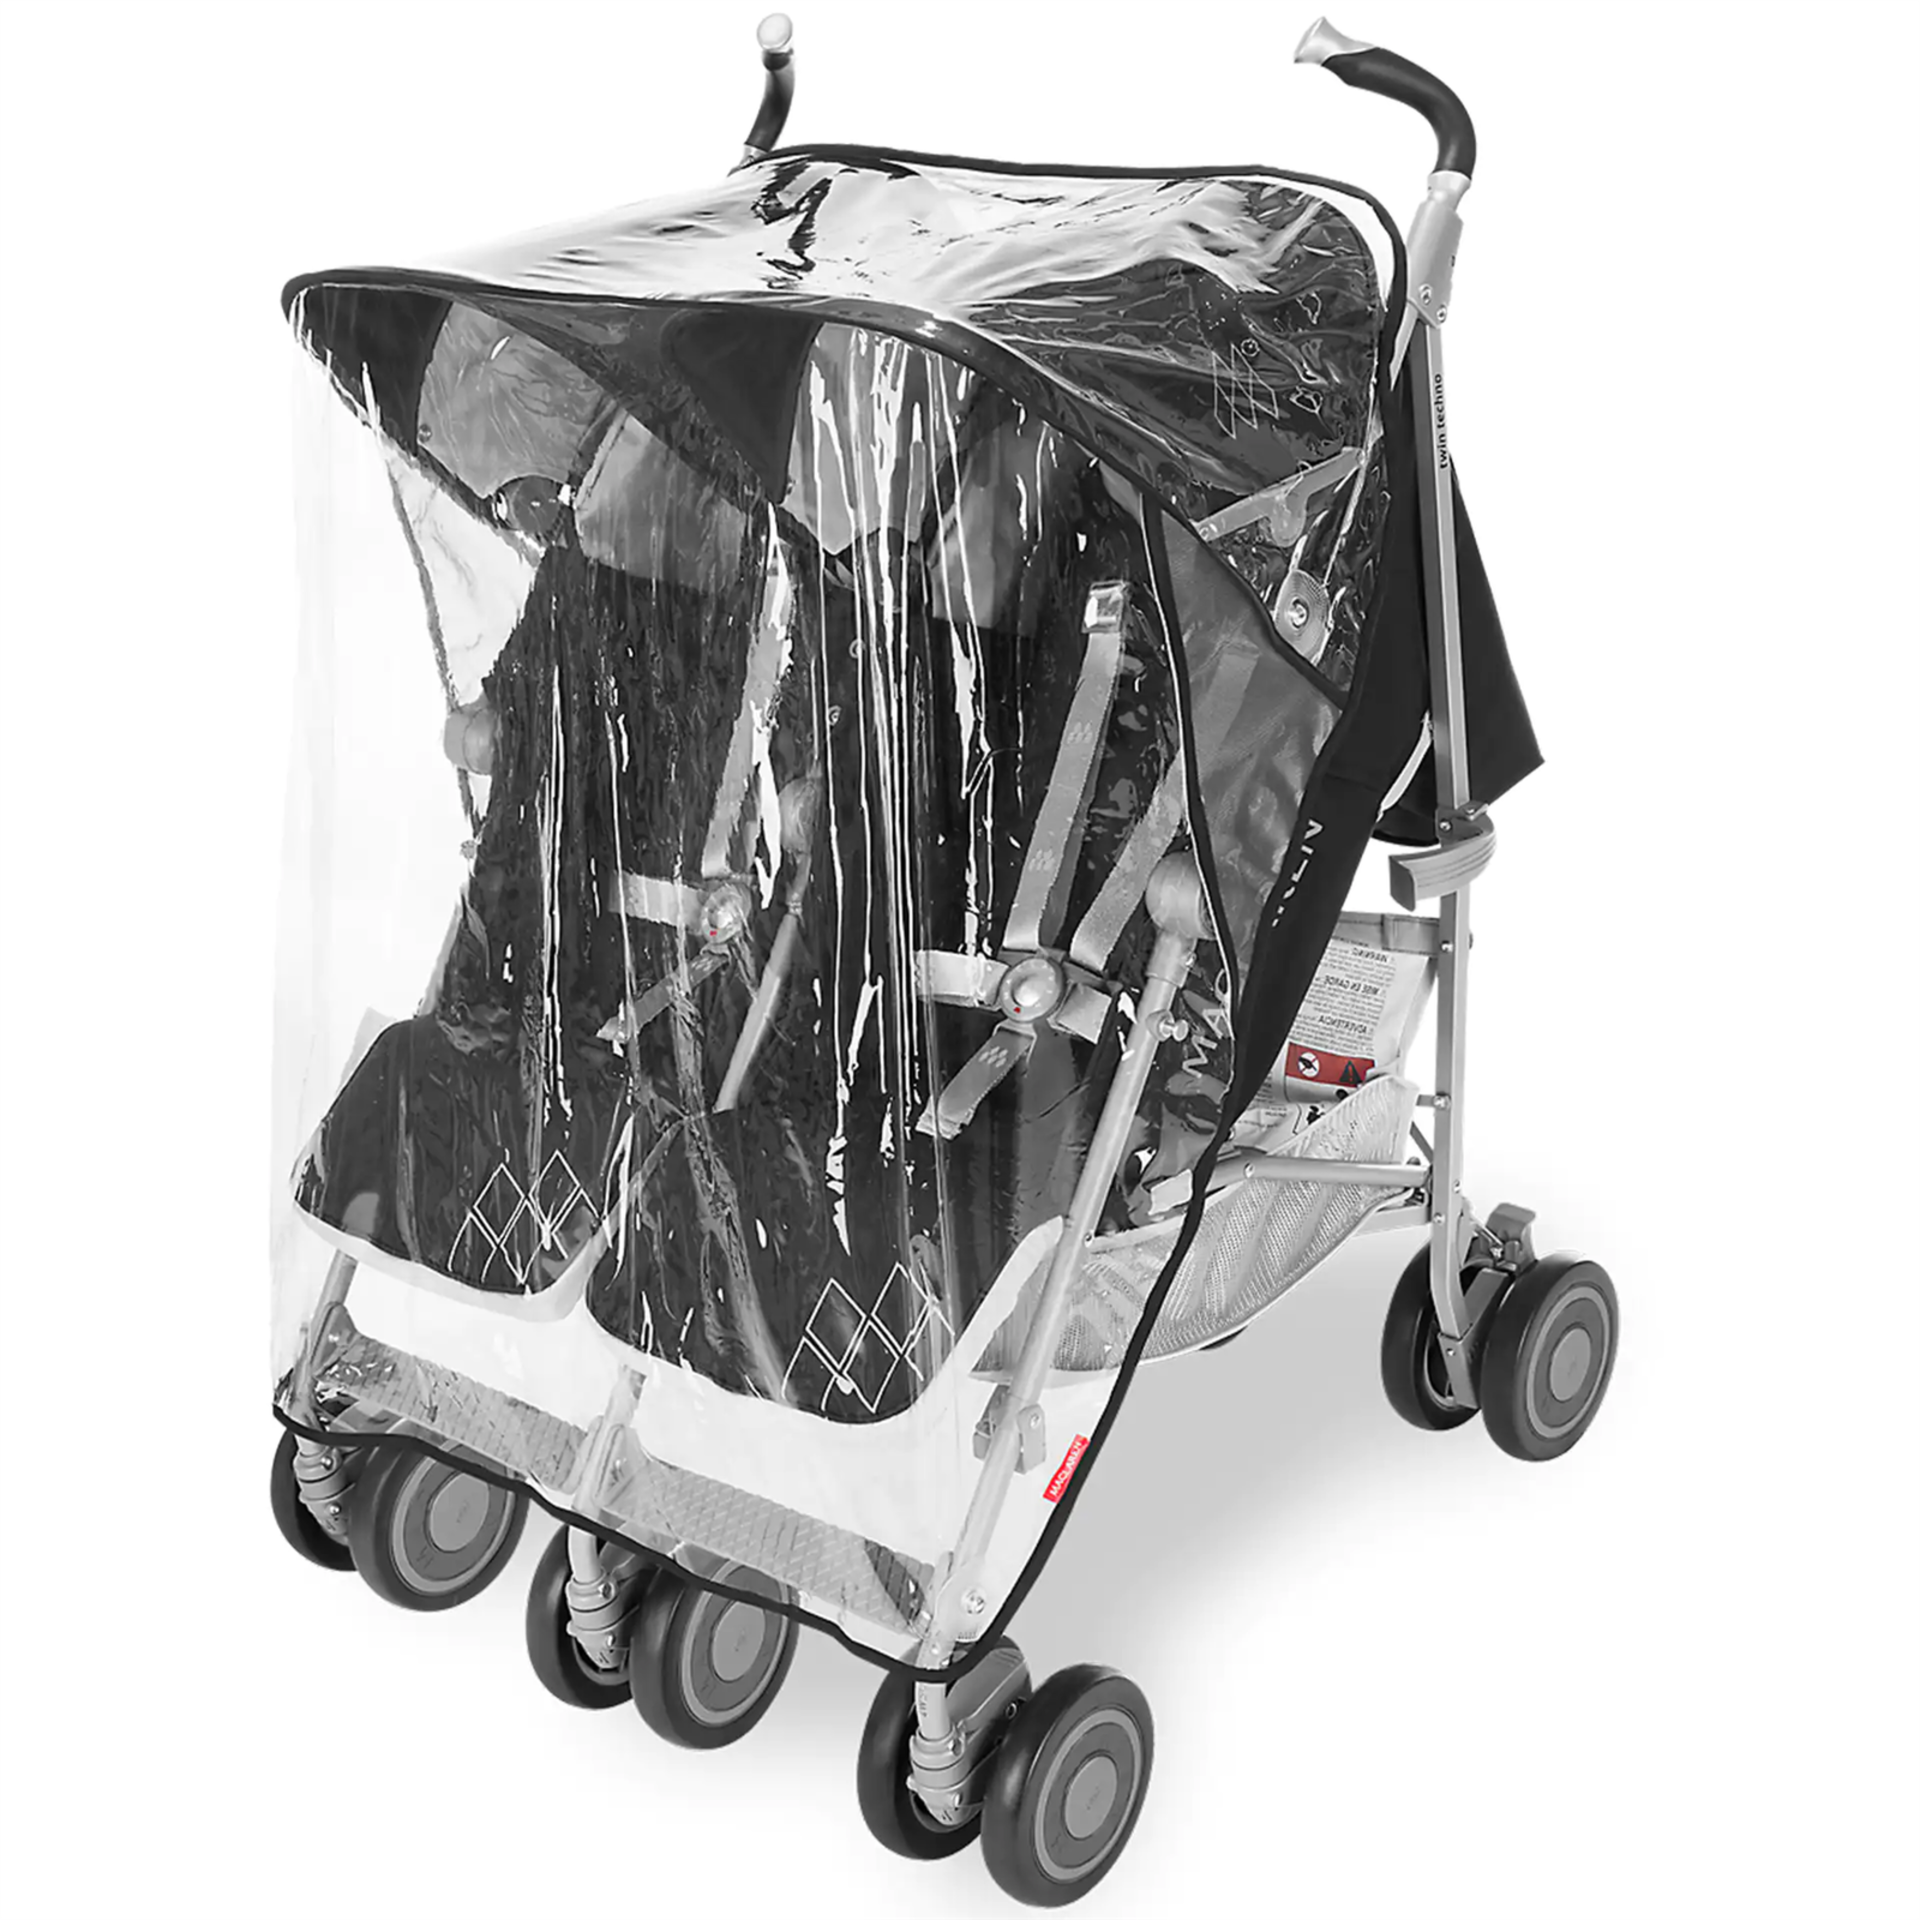 Maclaren Pushchair Twin Techno Black Built For Comfort/Performance For 2 Rrp £450 - Image 3 of 7